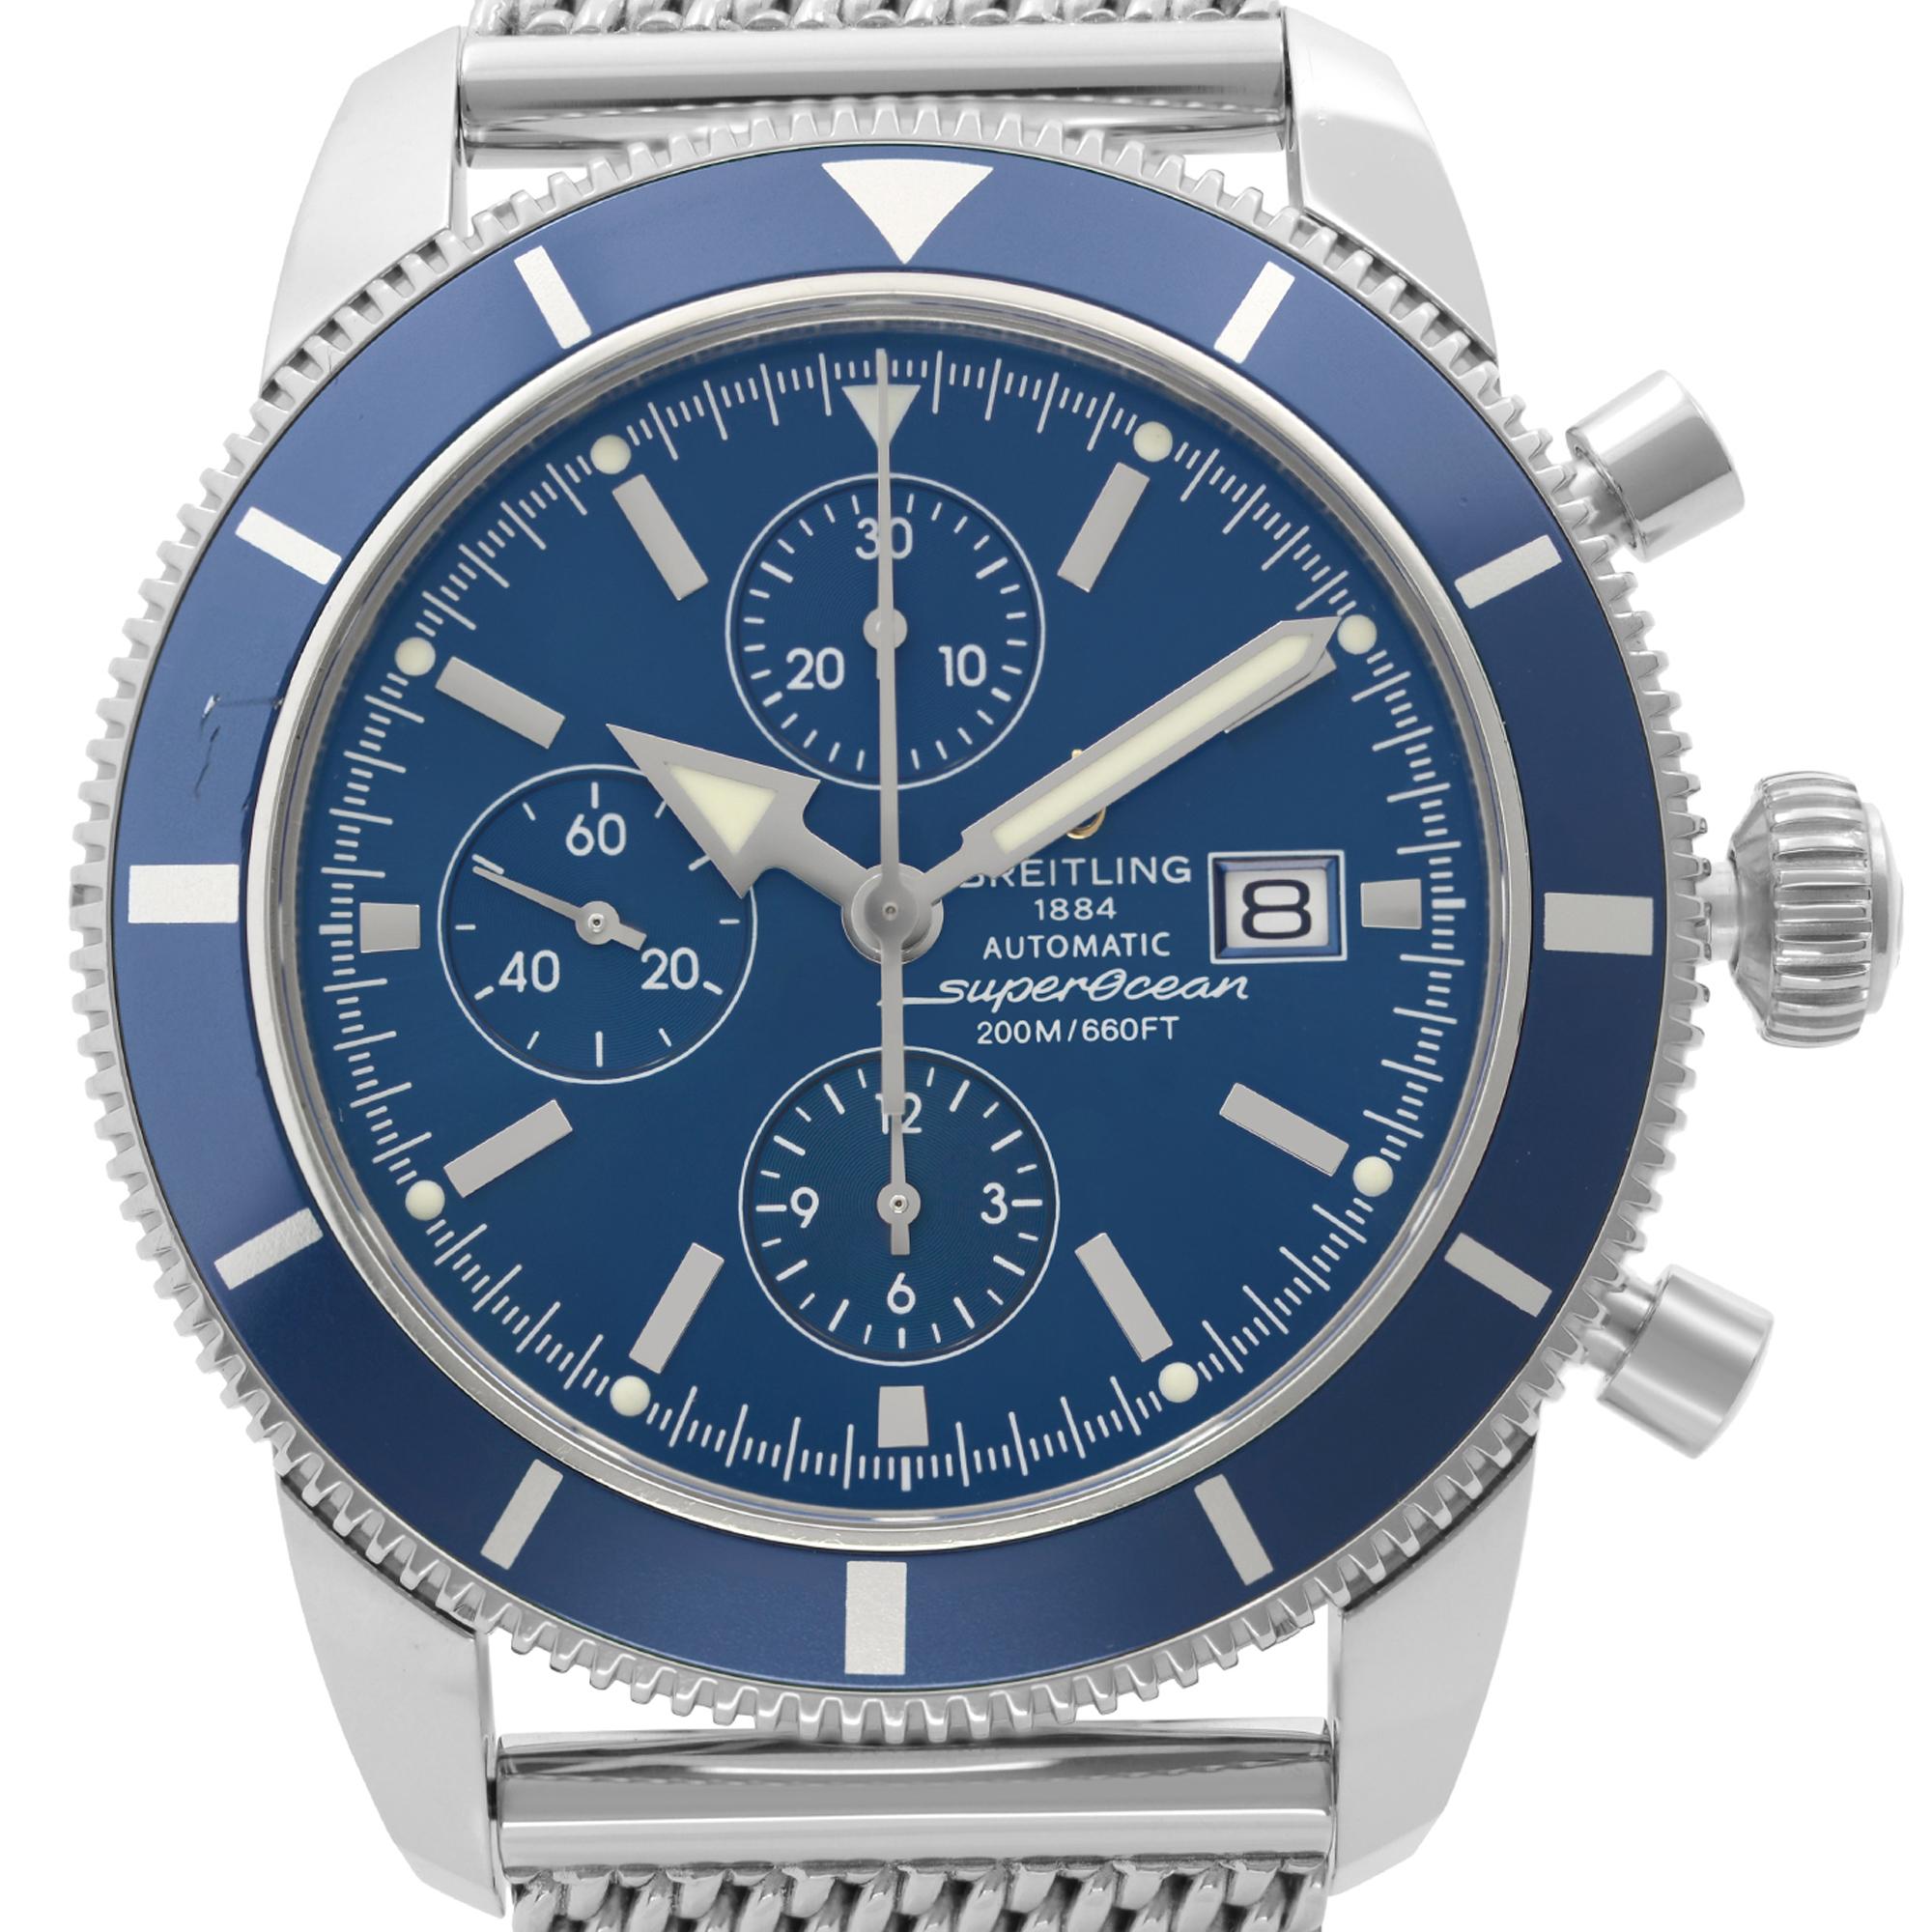 Pre-owned Condition Breitling Superocean Heritage 46mm Steel Blue Dial Men's Watch A13320. The bezel insert have a minor scratch between 9-10 O'Clock as visible in pictures. No Original Box and Papers are Included. Comes with Chronostore